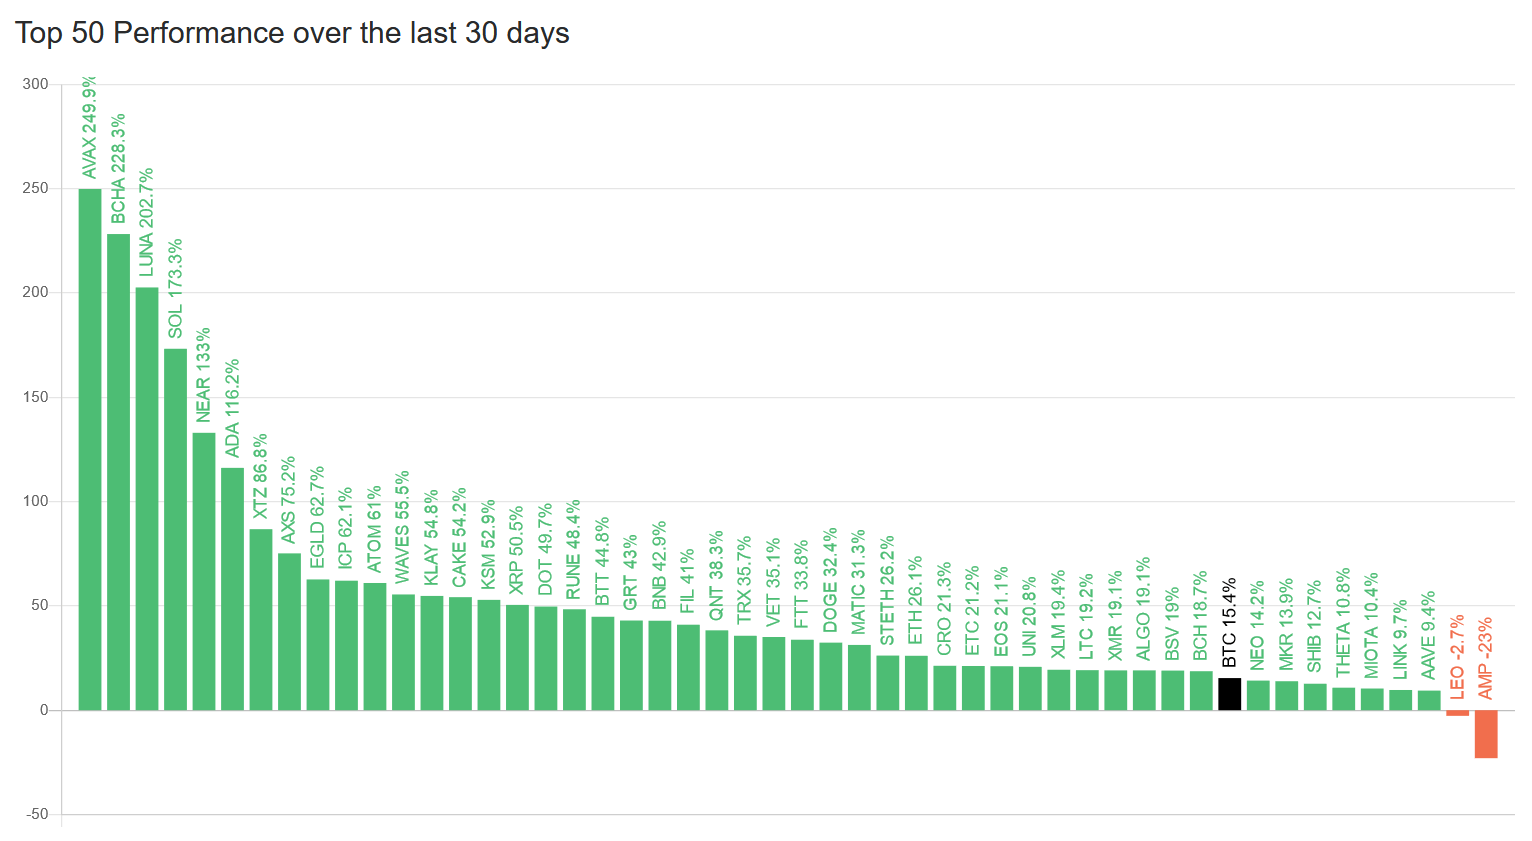 Top performing alts over the last 30 days